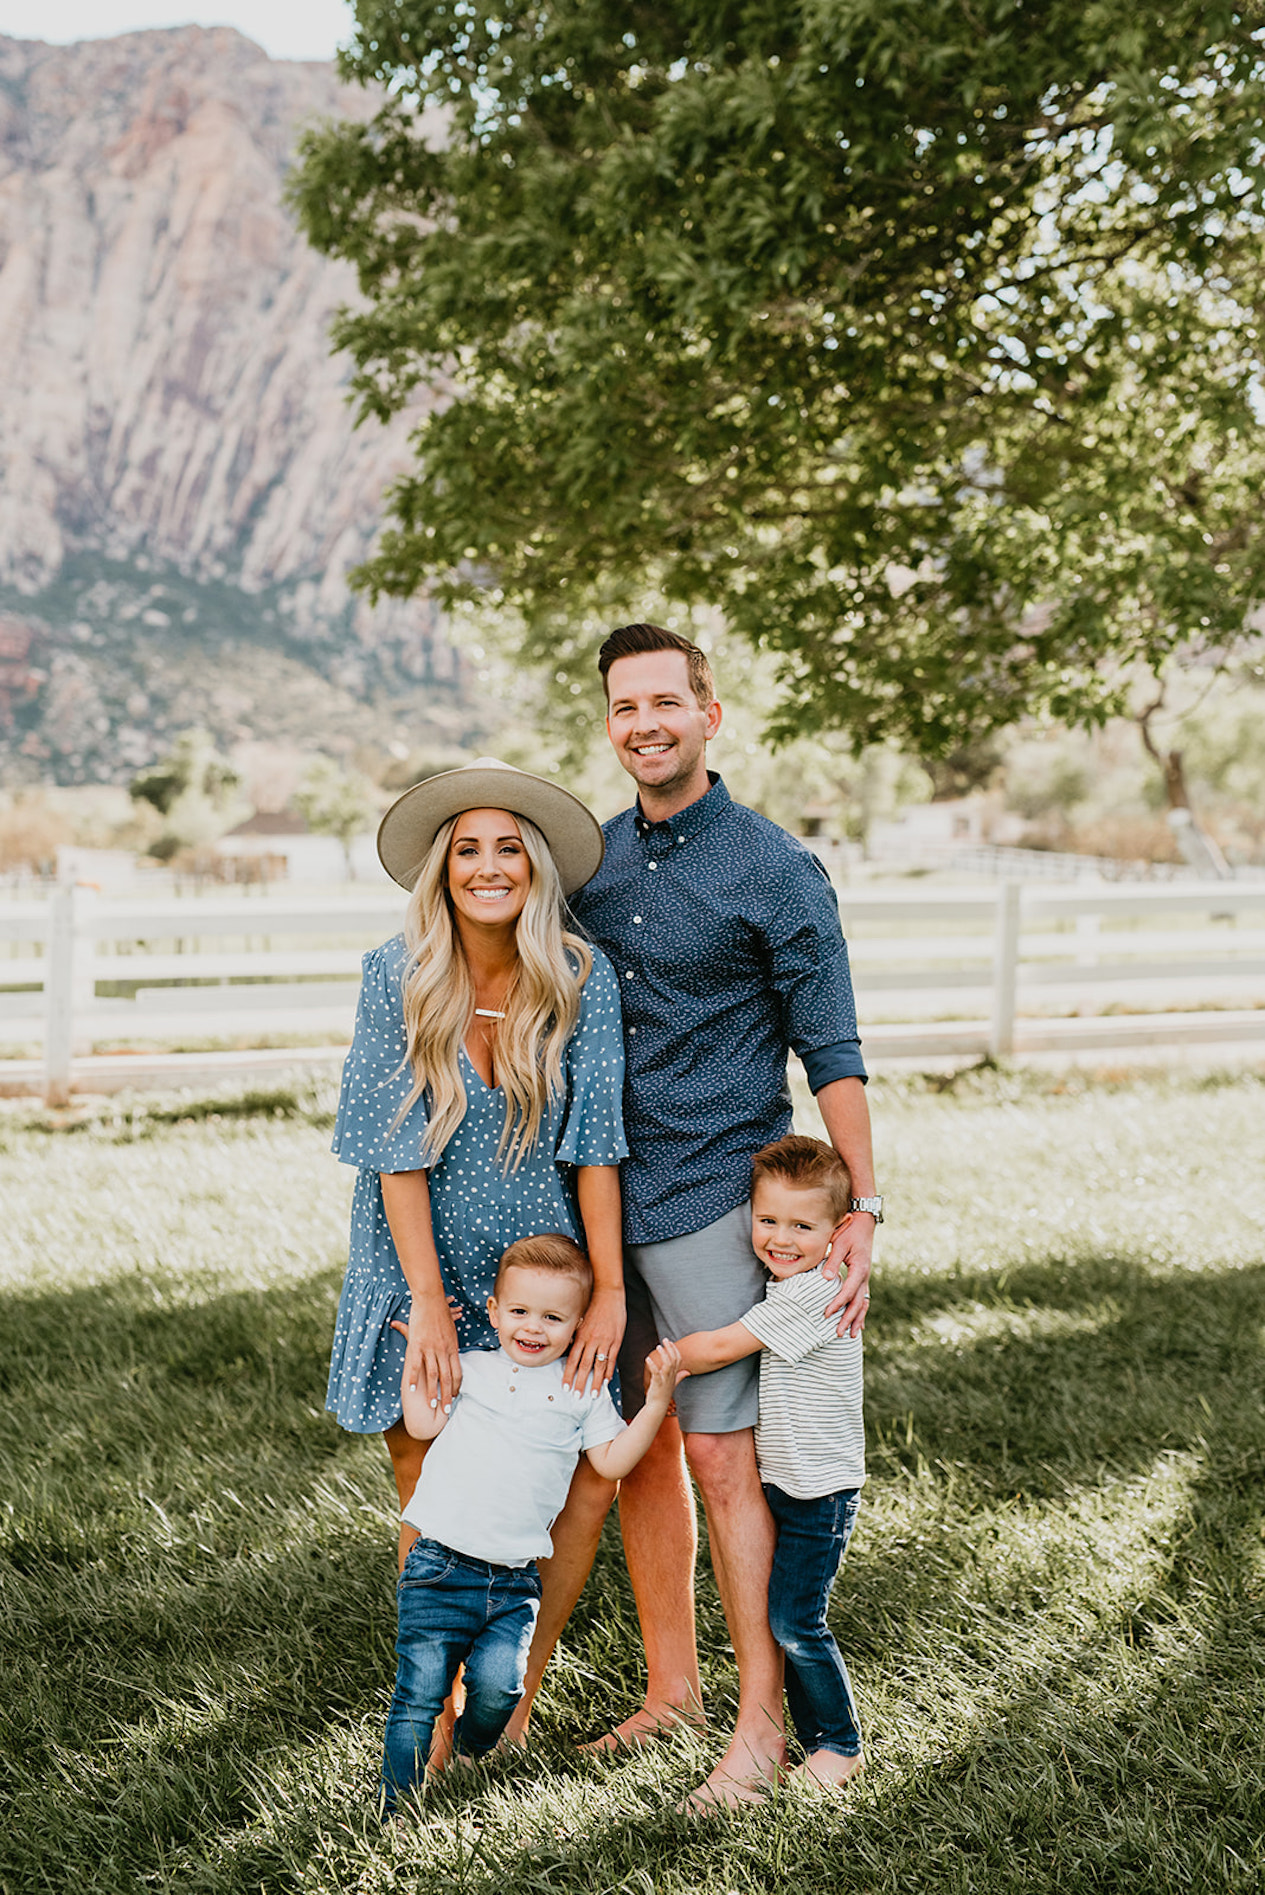 blue-dress-and-shirt-with-the-stripes-and-dots 70+ Best Chosen Family Photo Outfit Ideas in Summer 2022